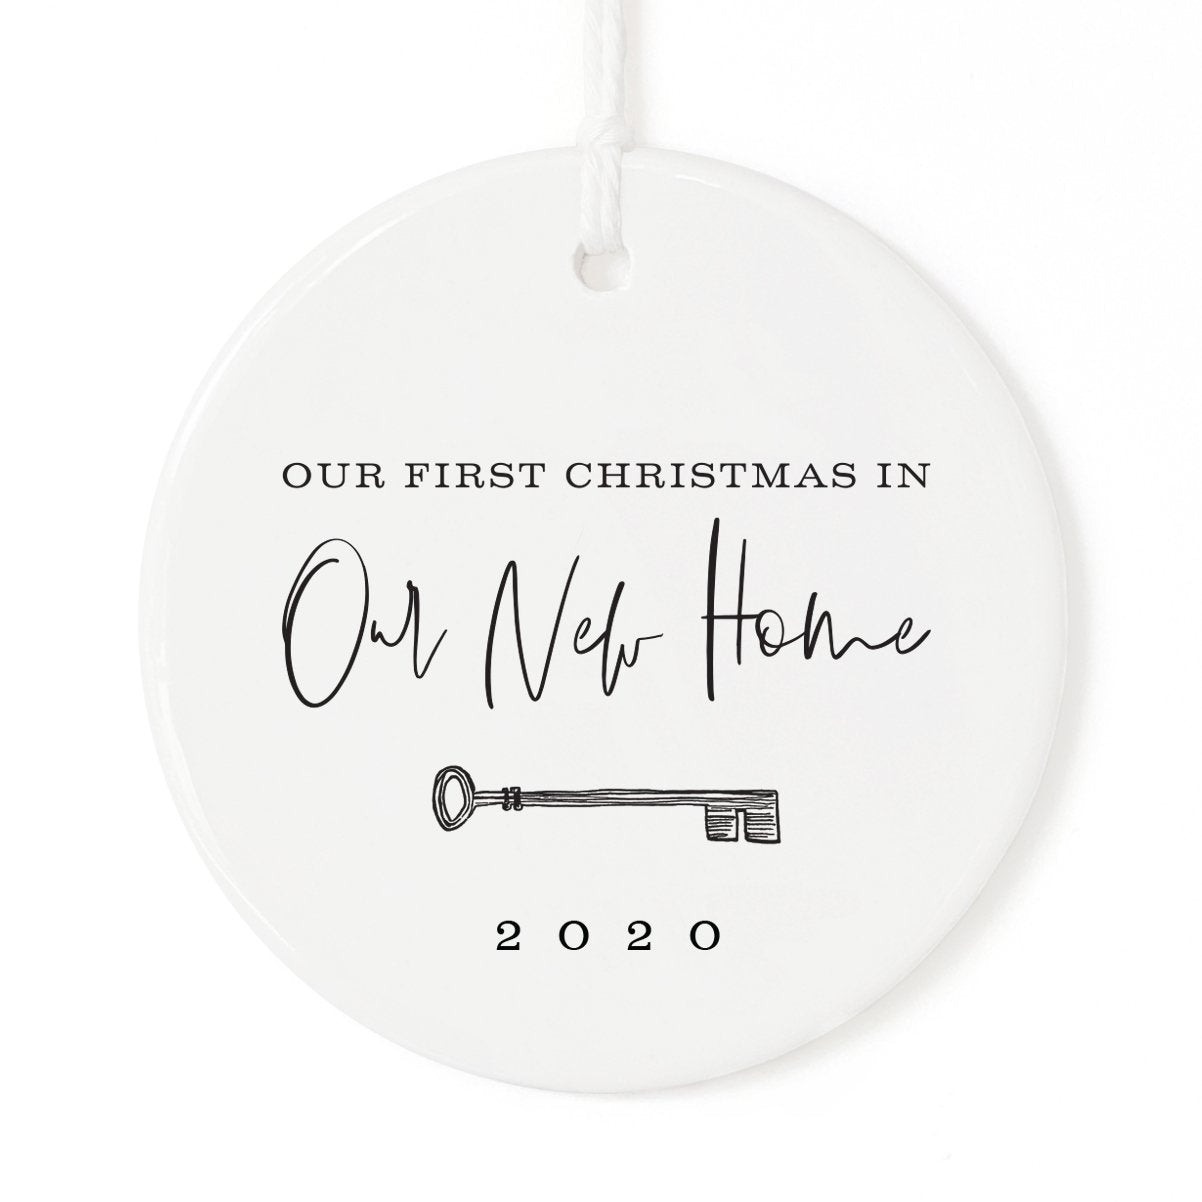 Our First Christmas in Our New Home Porcelain Ceramic Christmas